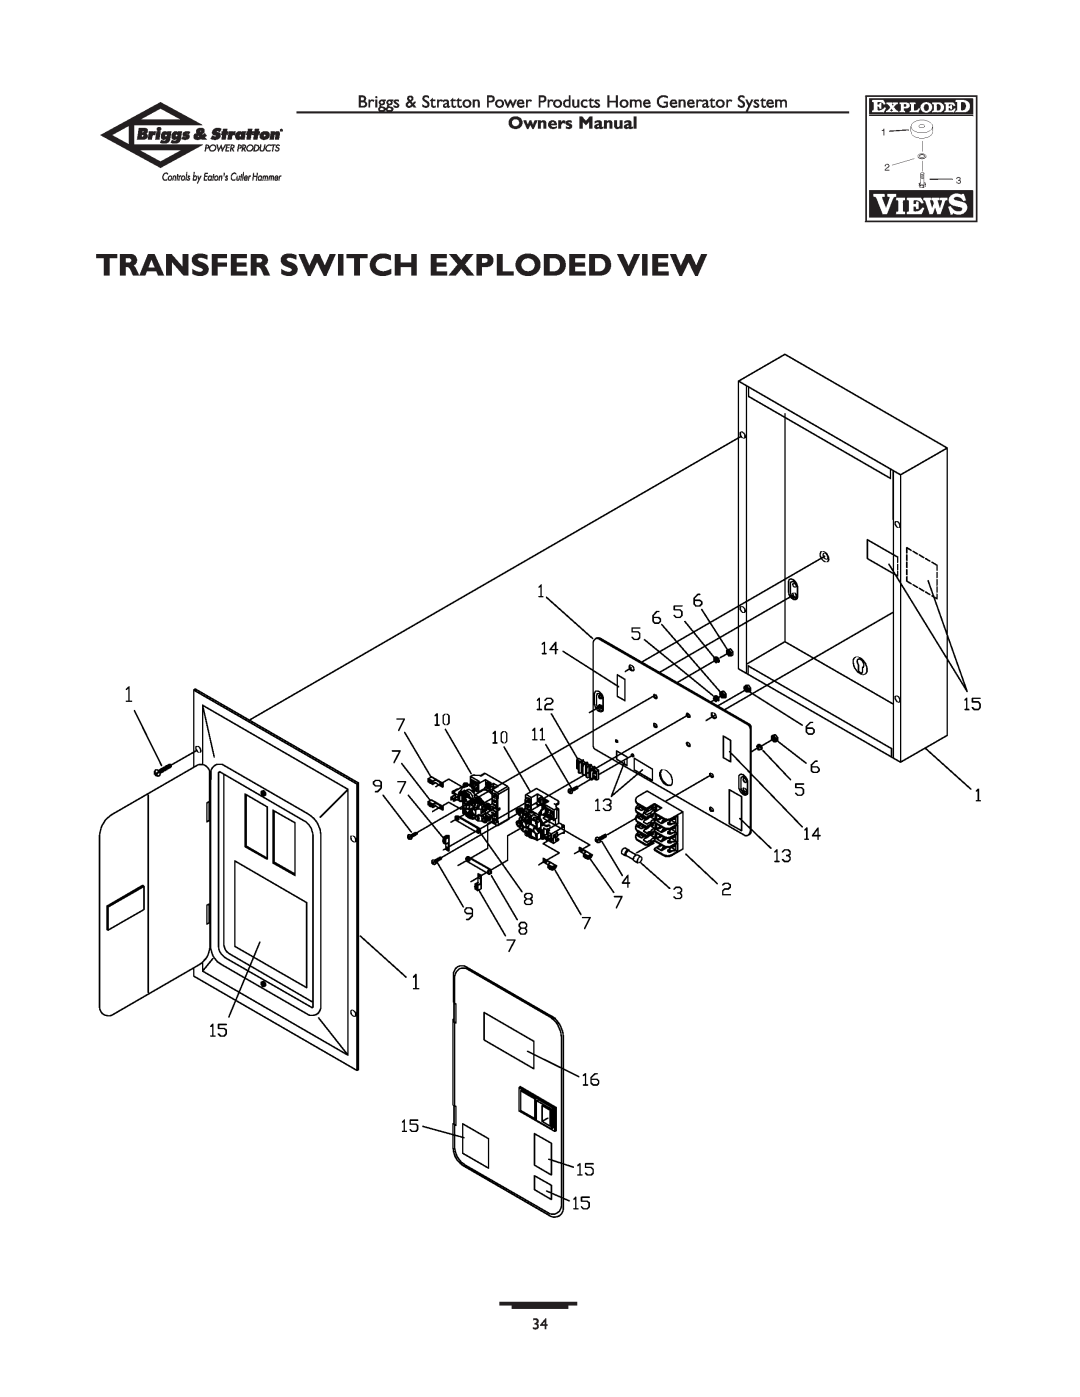 Briggs & Stratton 1679-0 owner manual Transfer Switch Exploded View, Owners Manual 